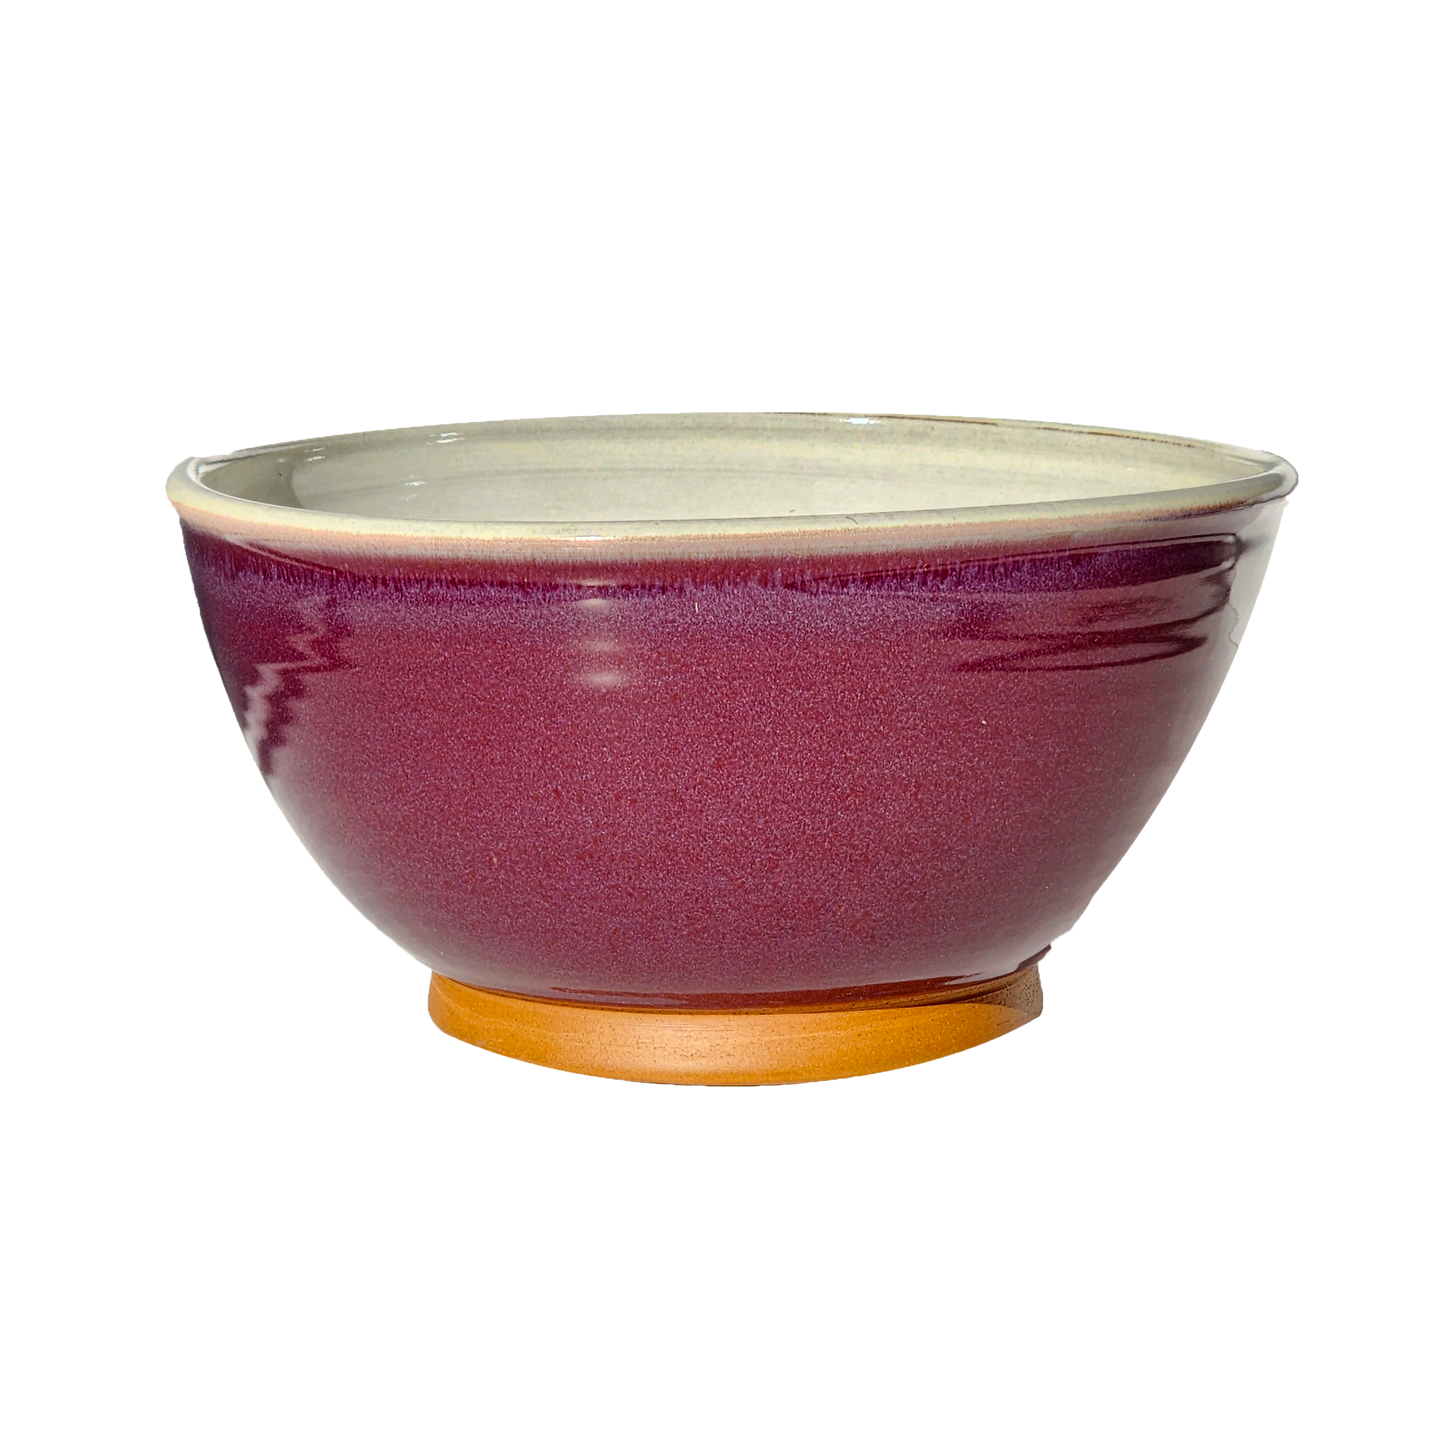 A large mixing bowl in vibrant red, featuring a spacious design with a capacity of 12.5 cups. Infuse your kitchen with energy and warmth with this bold hue.